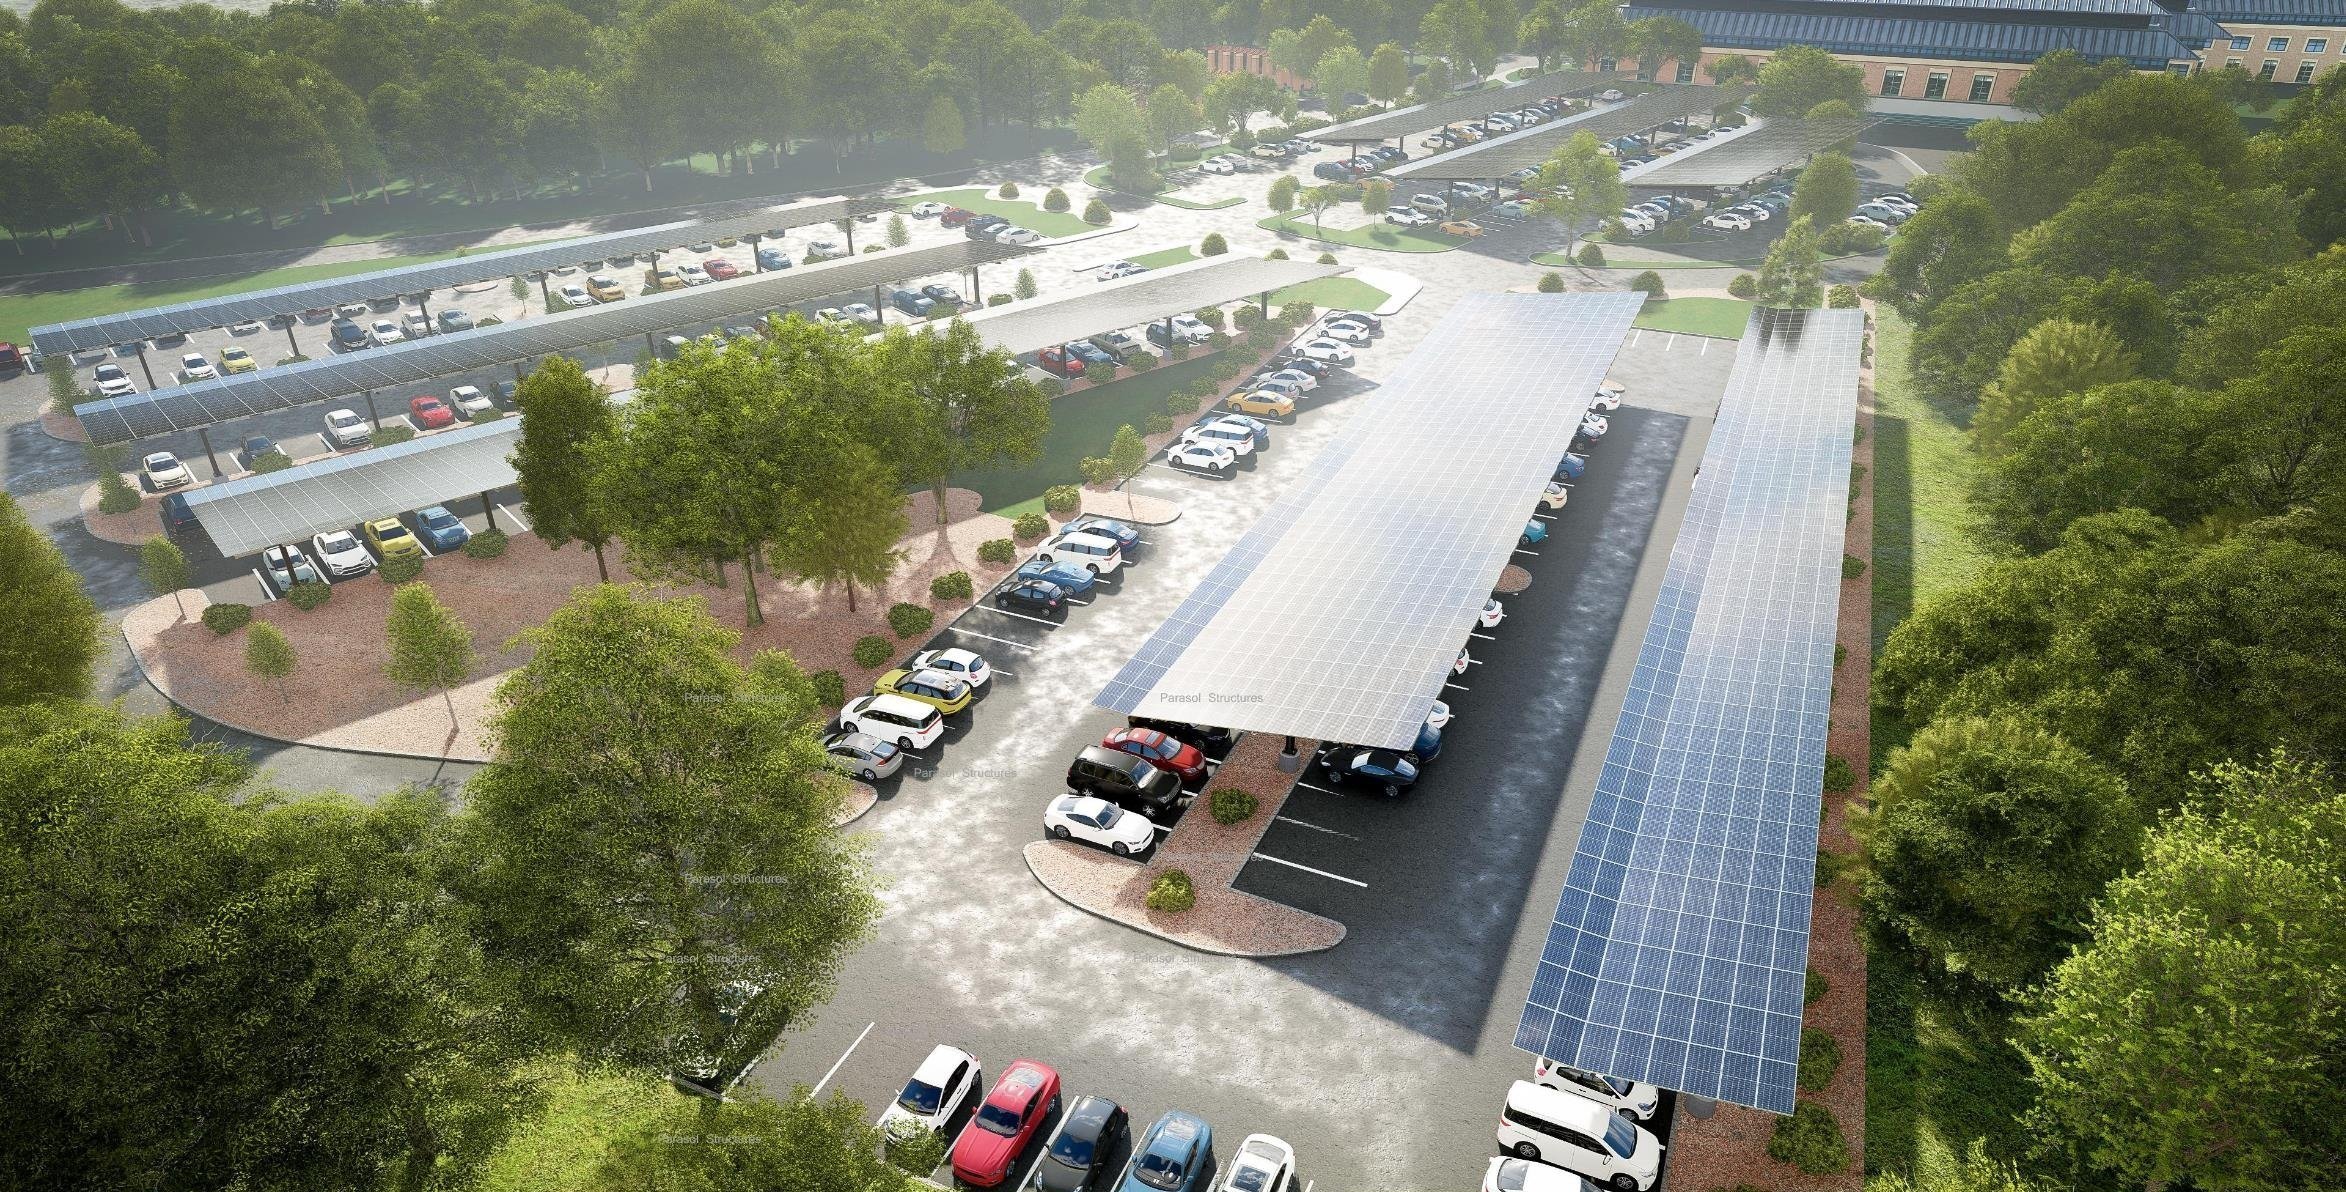 UNIVERSITY OF MARYLAND MEDICAL SYSTEM ANNOUNCES SOLAR ENERGY CANOPY PROJECT